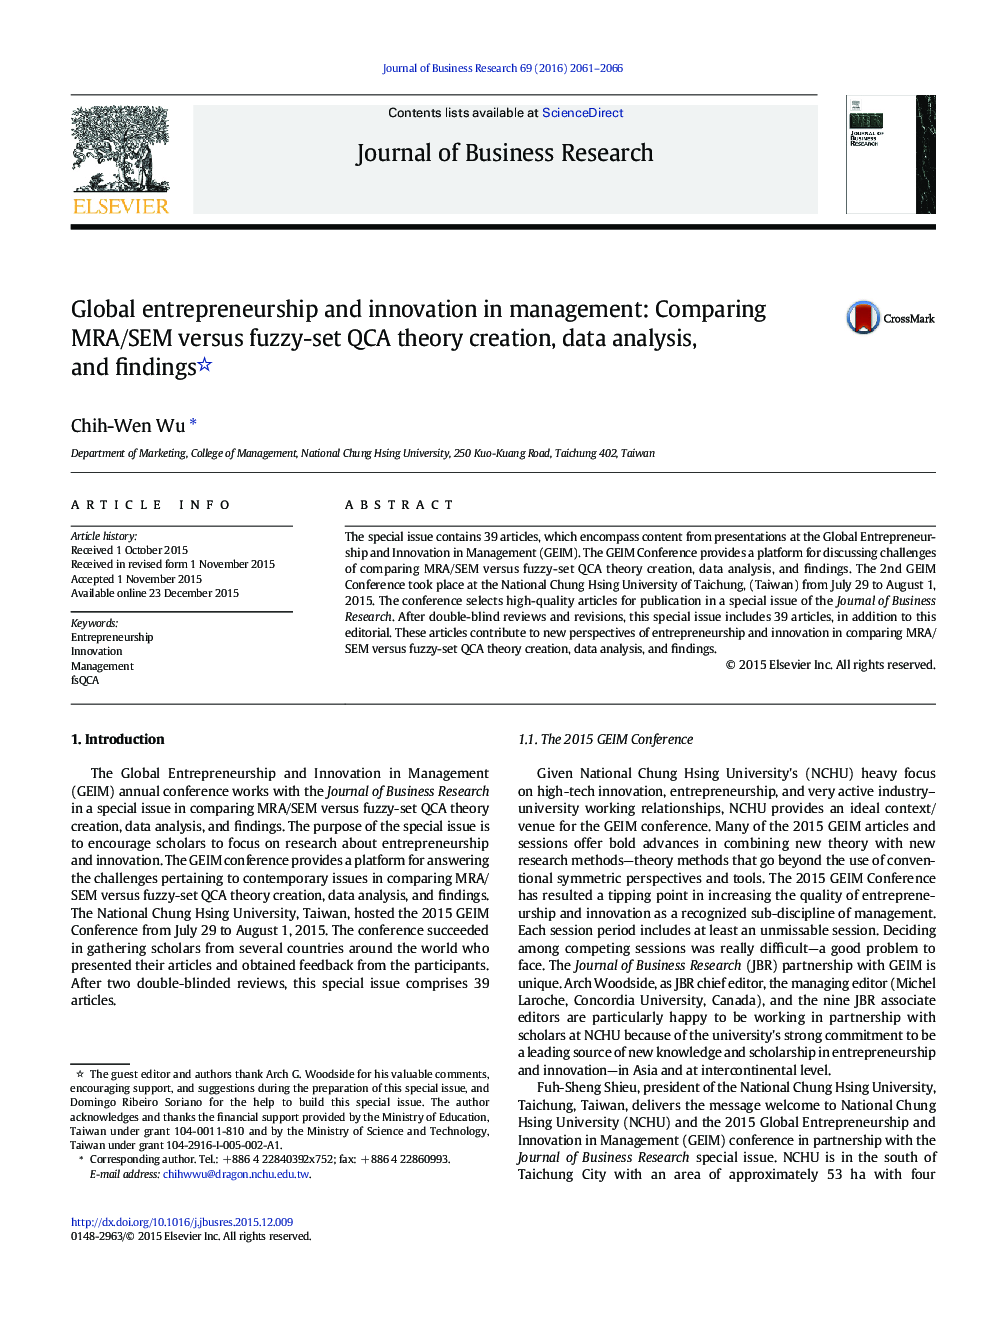 Global entrepreneurship and innovation in management: Comparing MRA/SEM versus fuzzy-set QCA theory creation, data analysis, and findings 